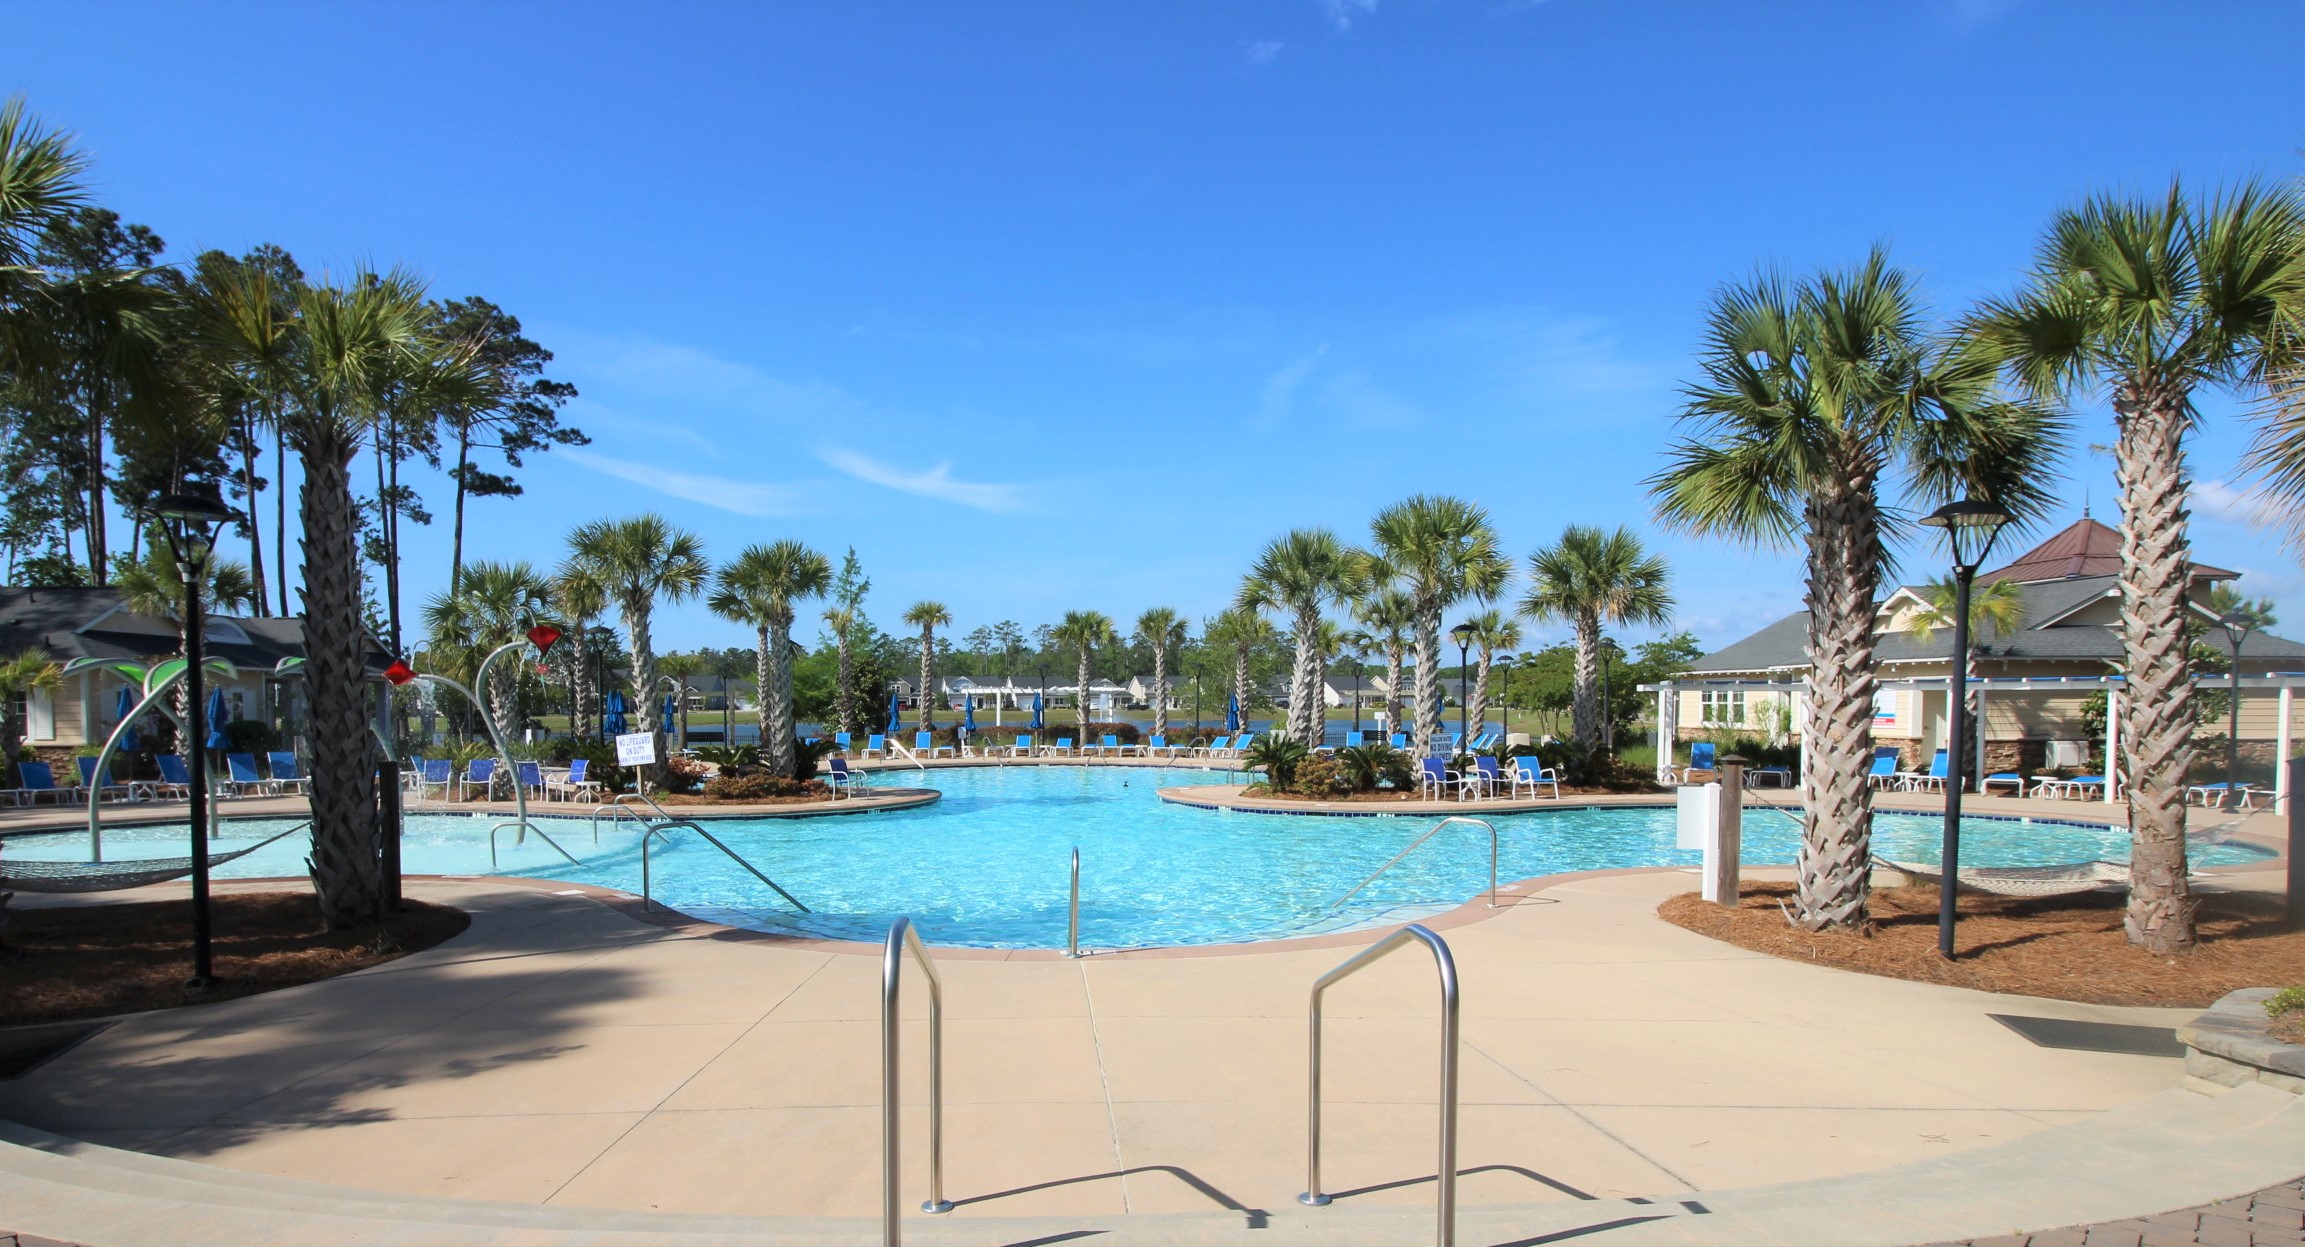 View of the pool at Emmens Preserve in Myrtle Beach